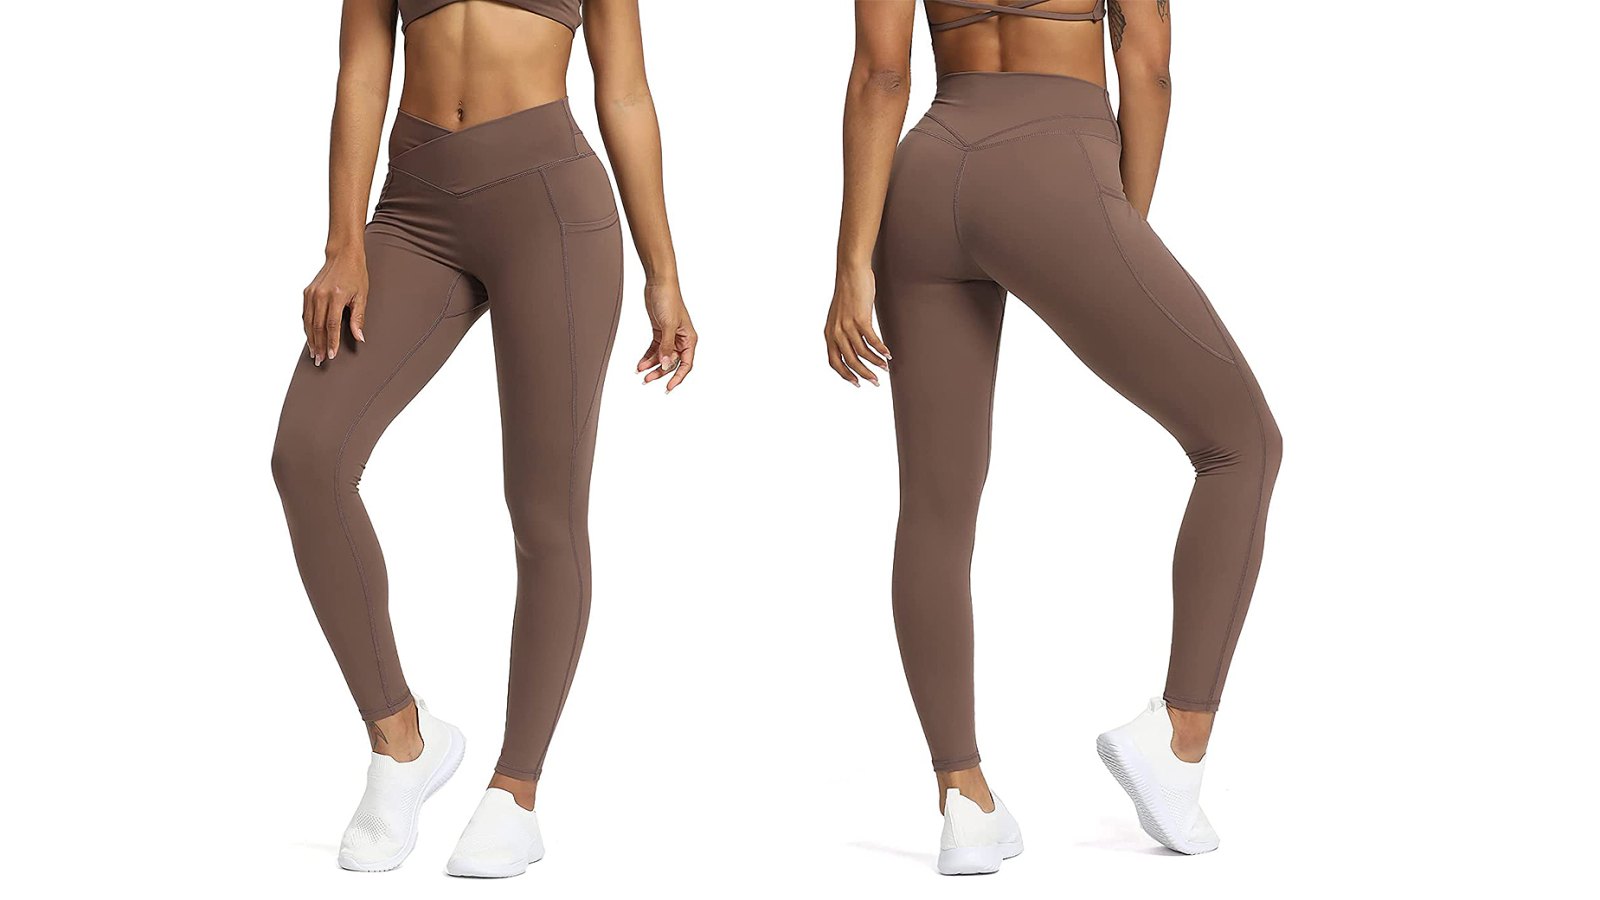 Aoxjox High Waisted Workout Leggings for Women Tummy Control